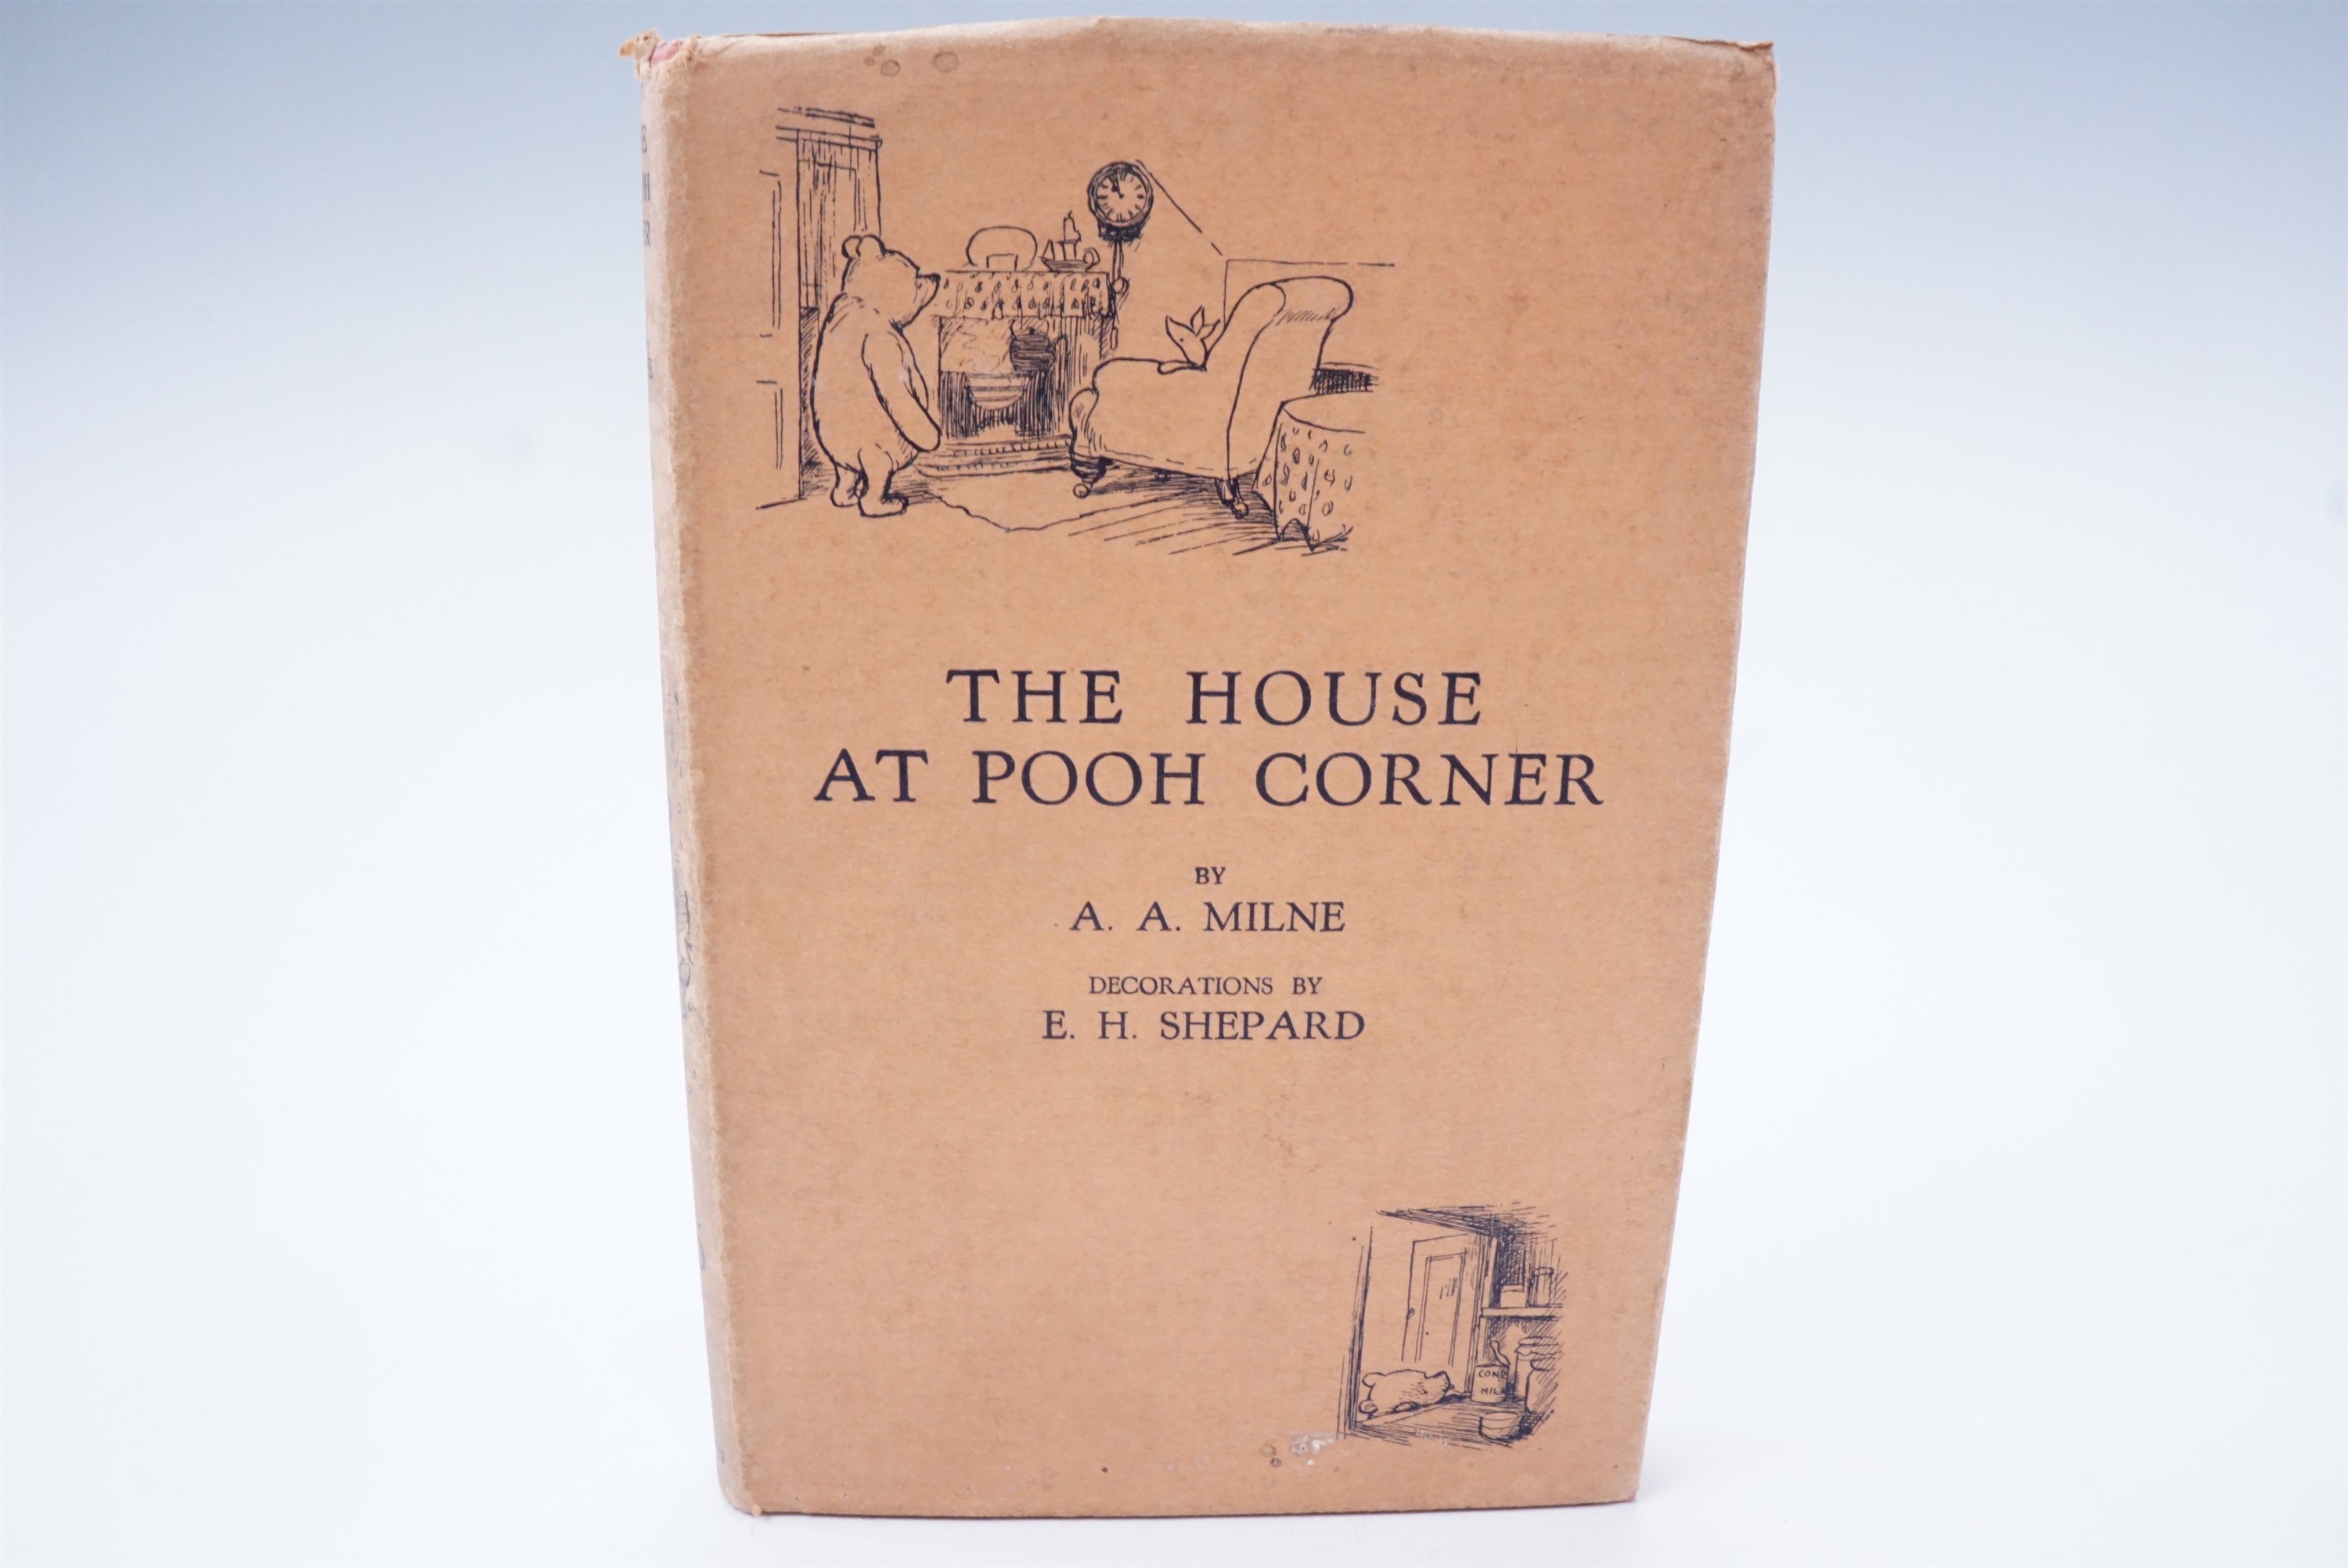 A A Milne, "The House at Pooh Corner", Methuen, 1928, first edition in dust wrapper, gilt